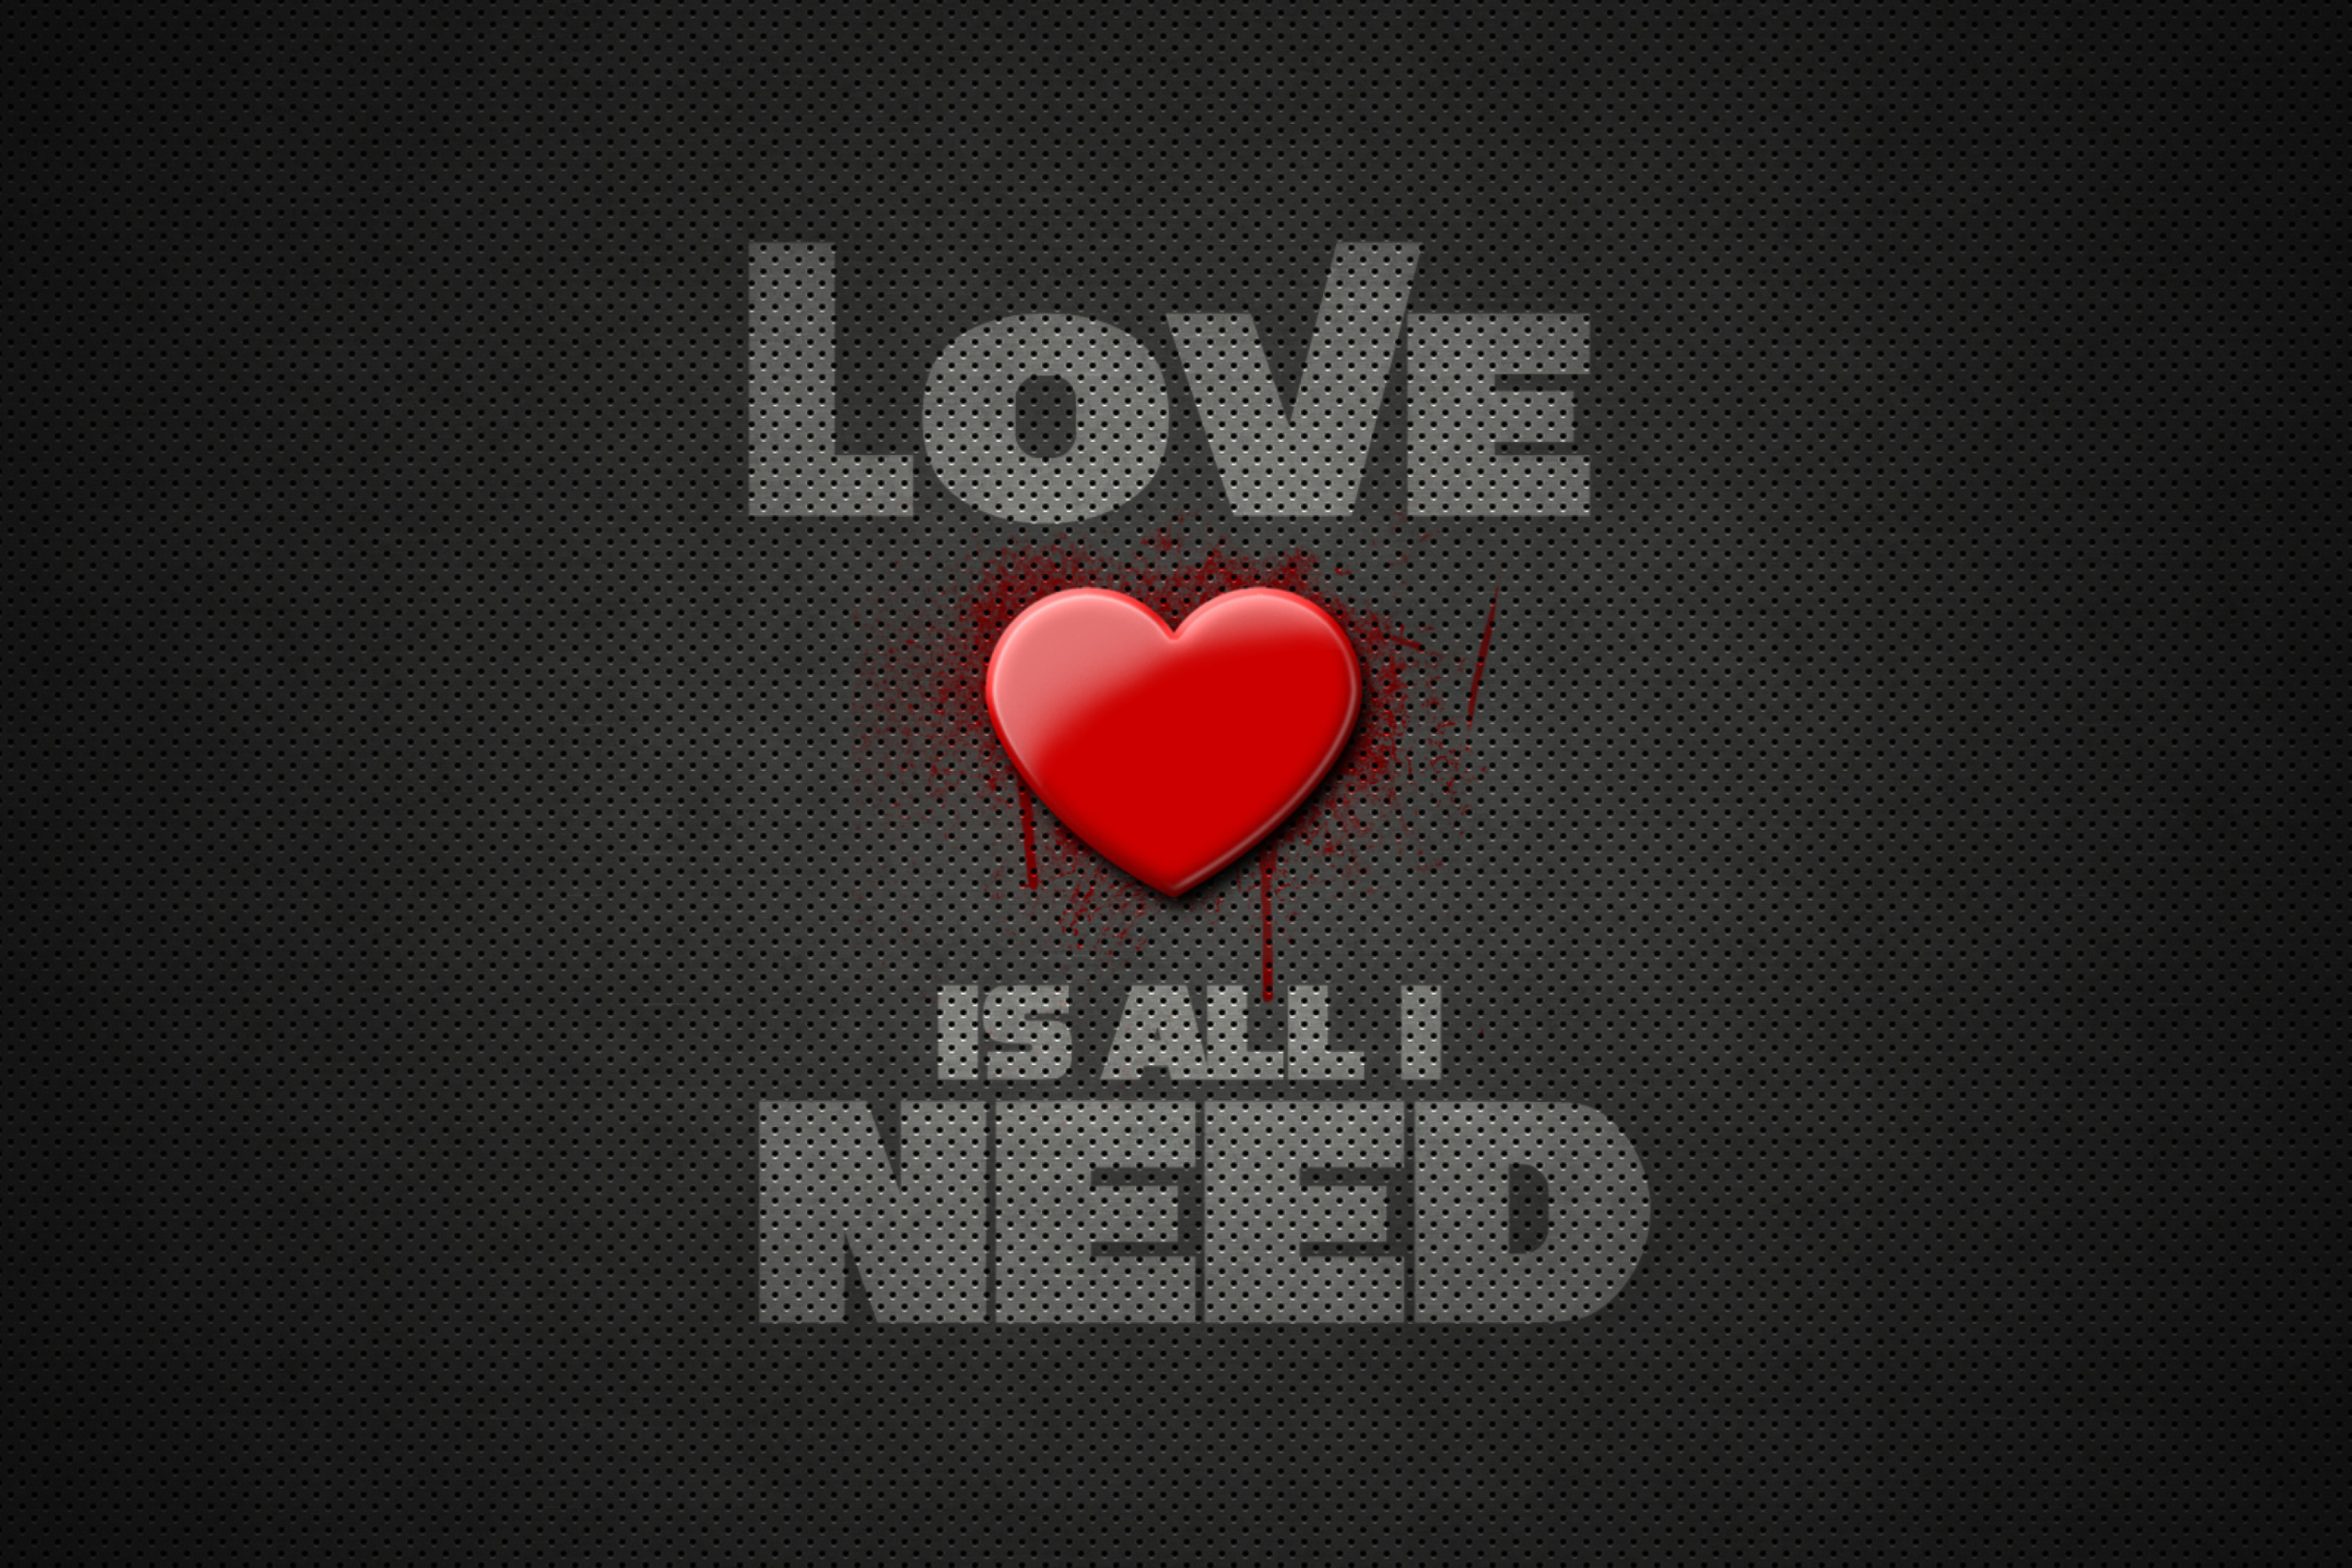 Love Is All I Need wallpaper 2880x1920